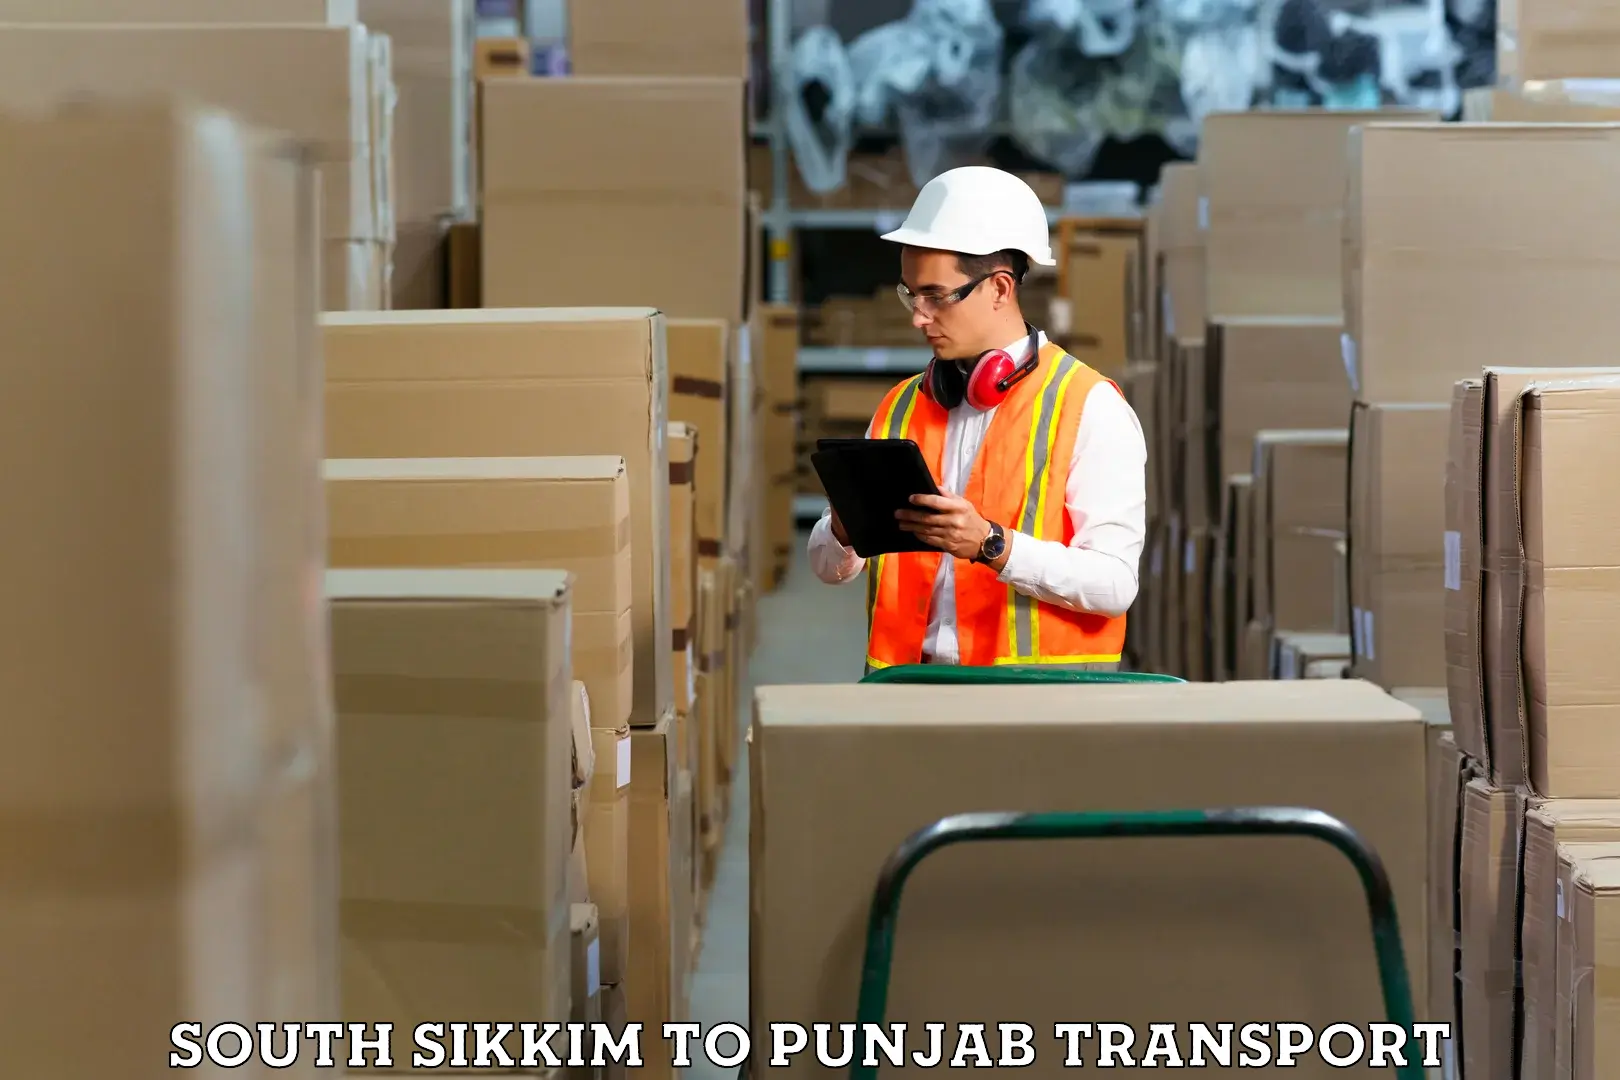 Daily parcel service transport South Sikkim to Muktsar